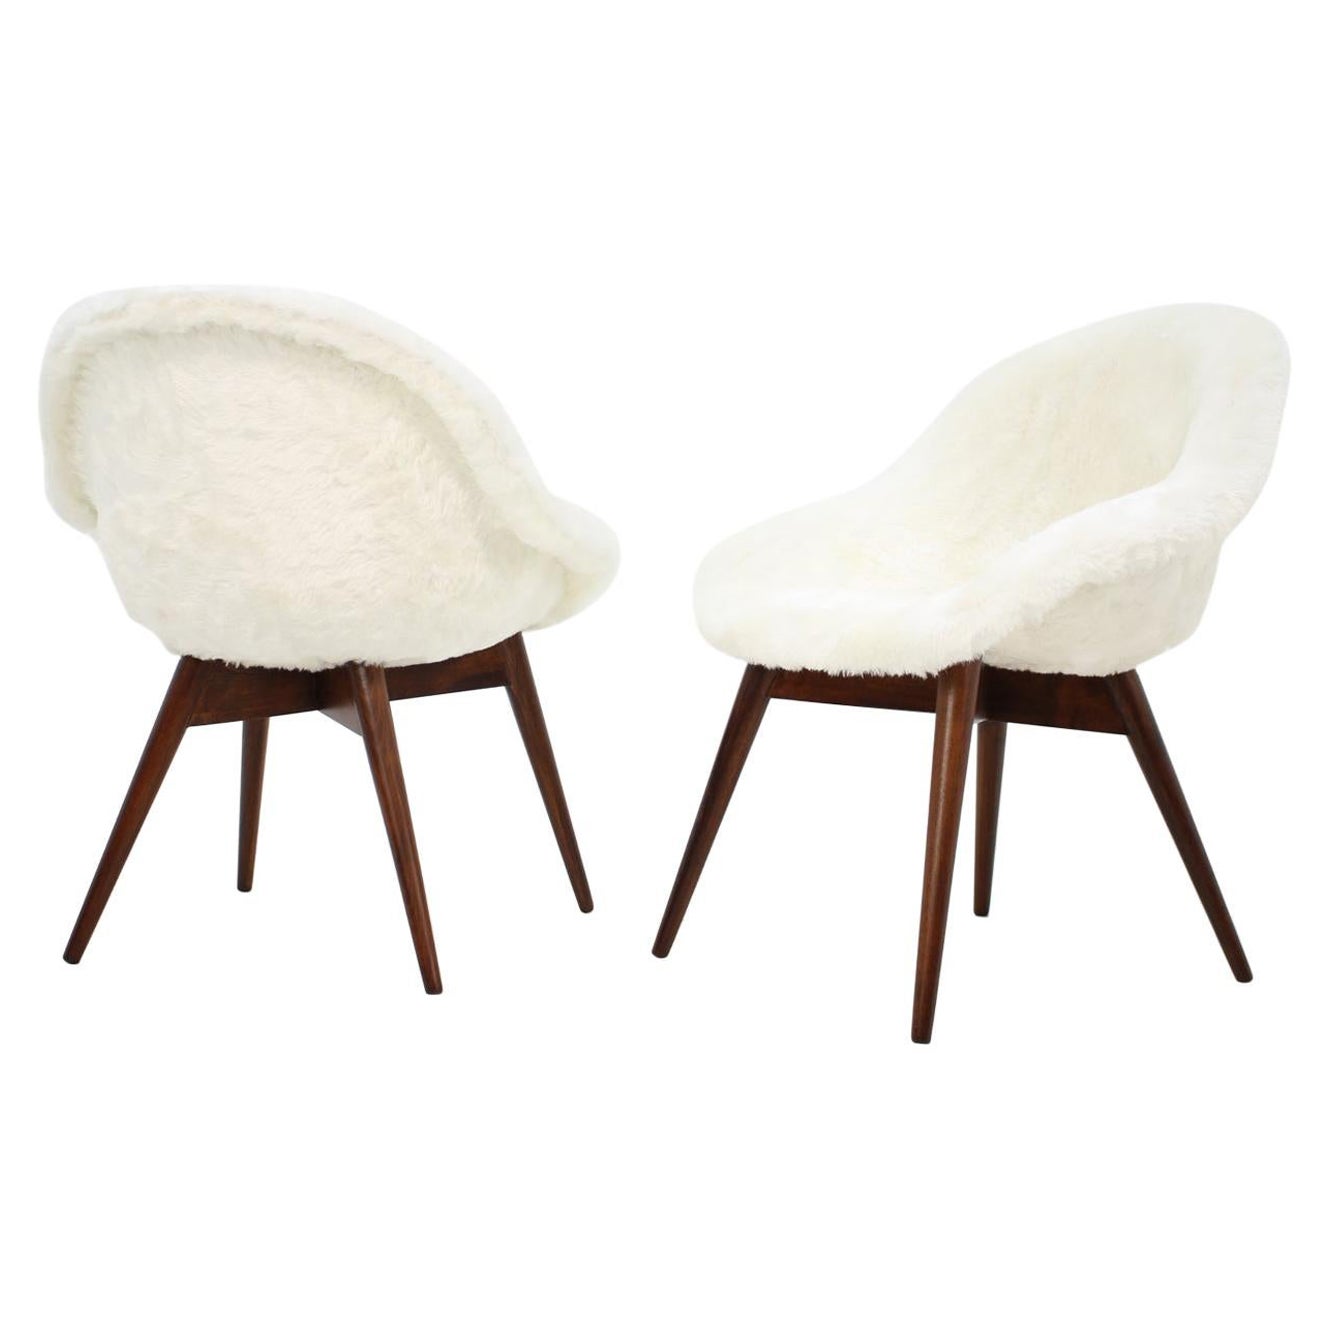 Pair of Two Lounge Chairs by Miroslav Navratil, 1960s For Sale